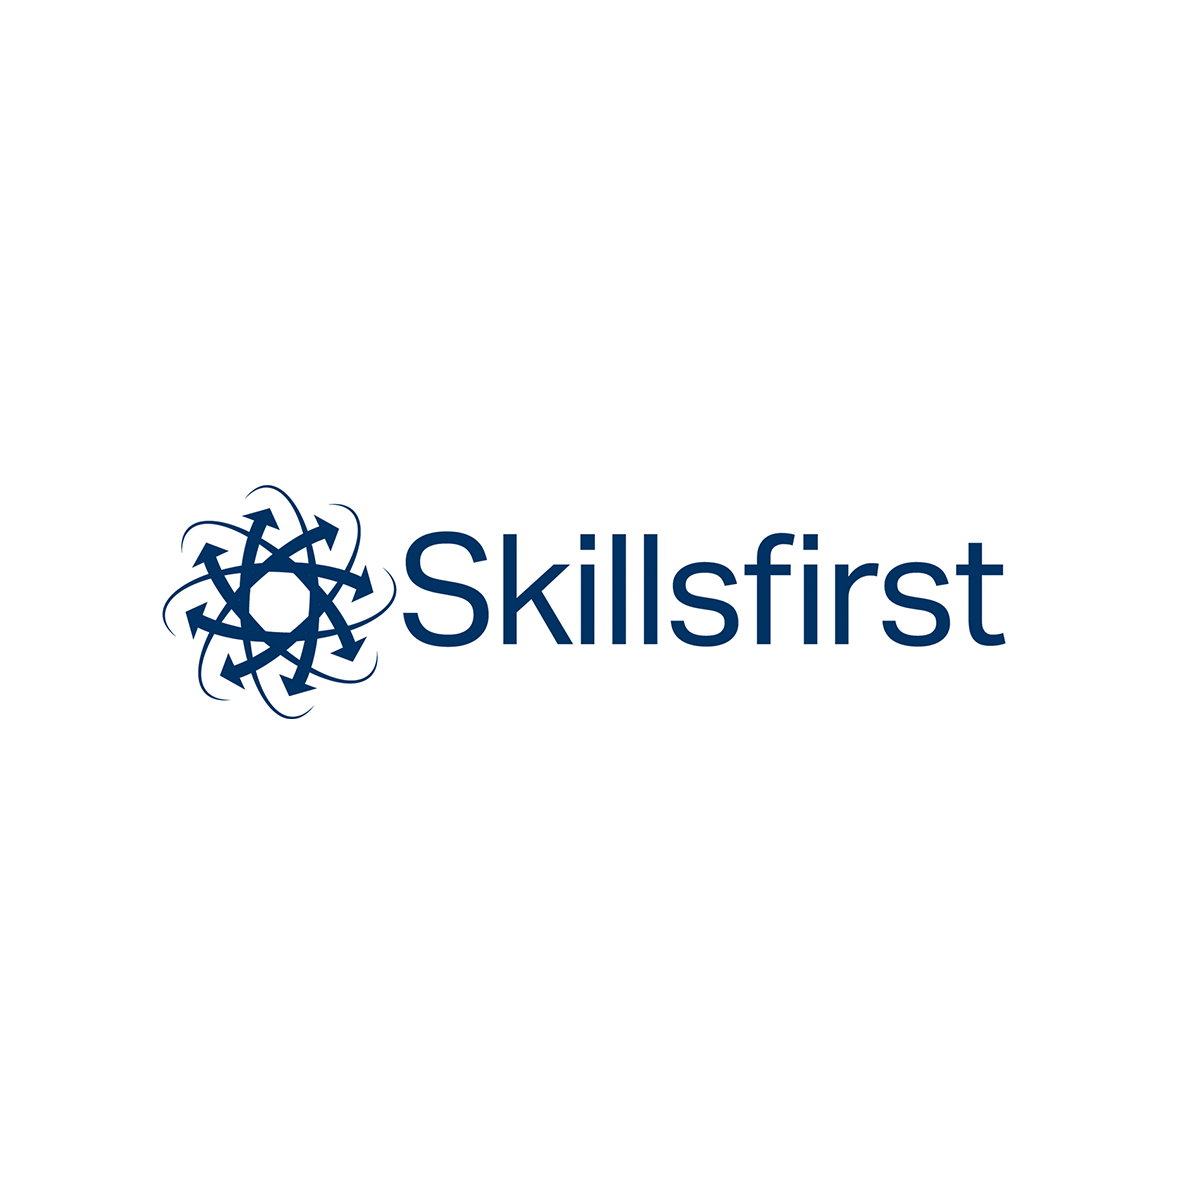 skillsfirst practice papers